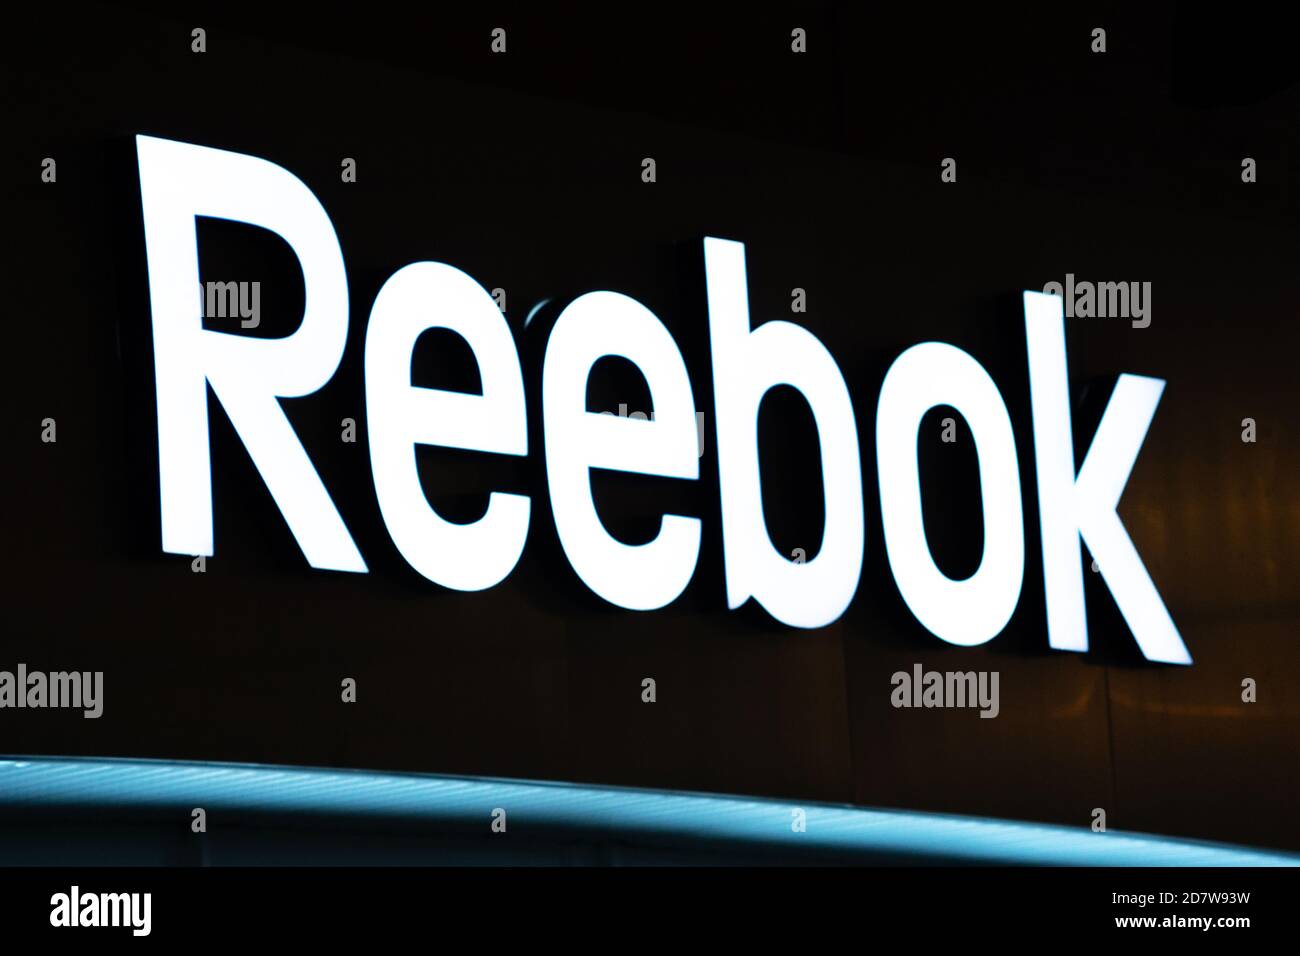 Reebok Logo High Resolution Stock Photography and Images - Alamy